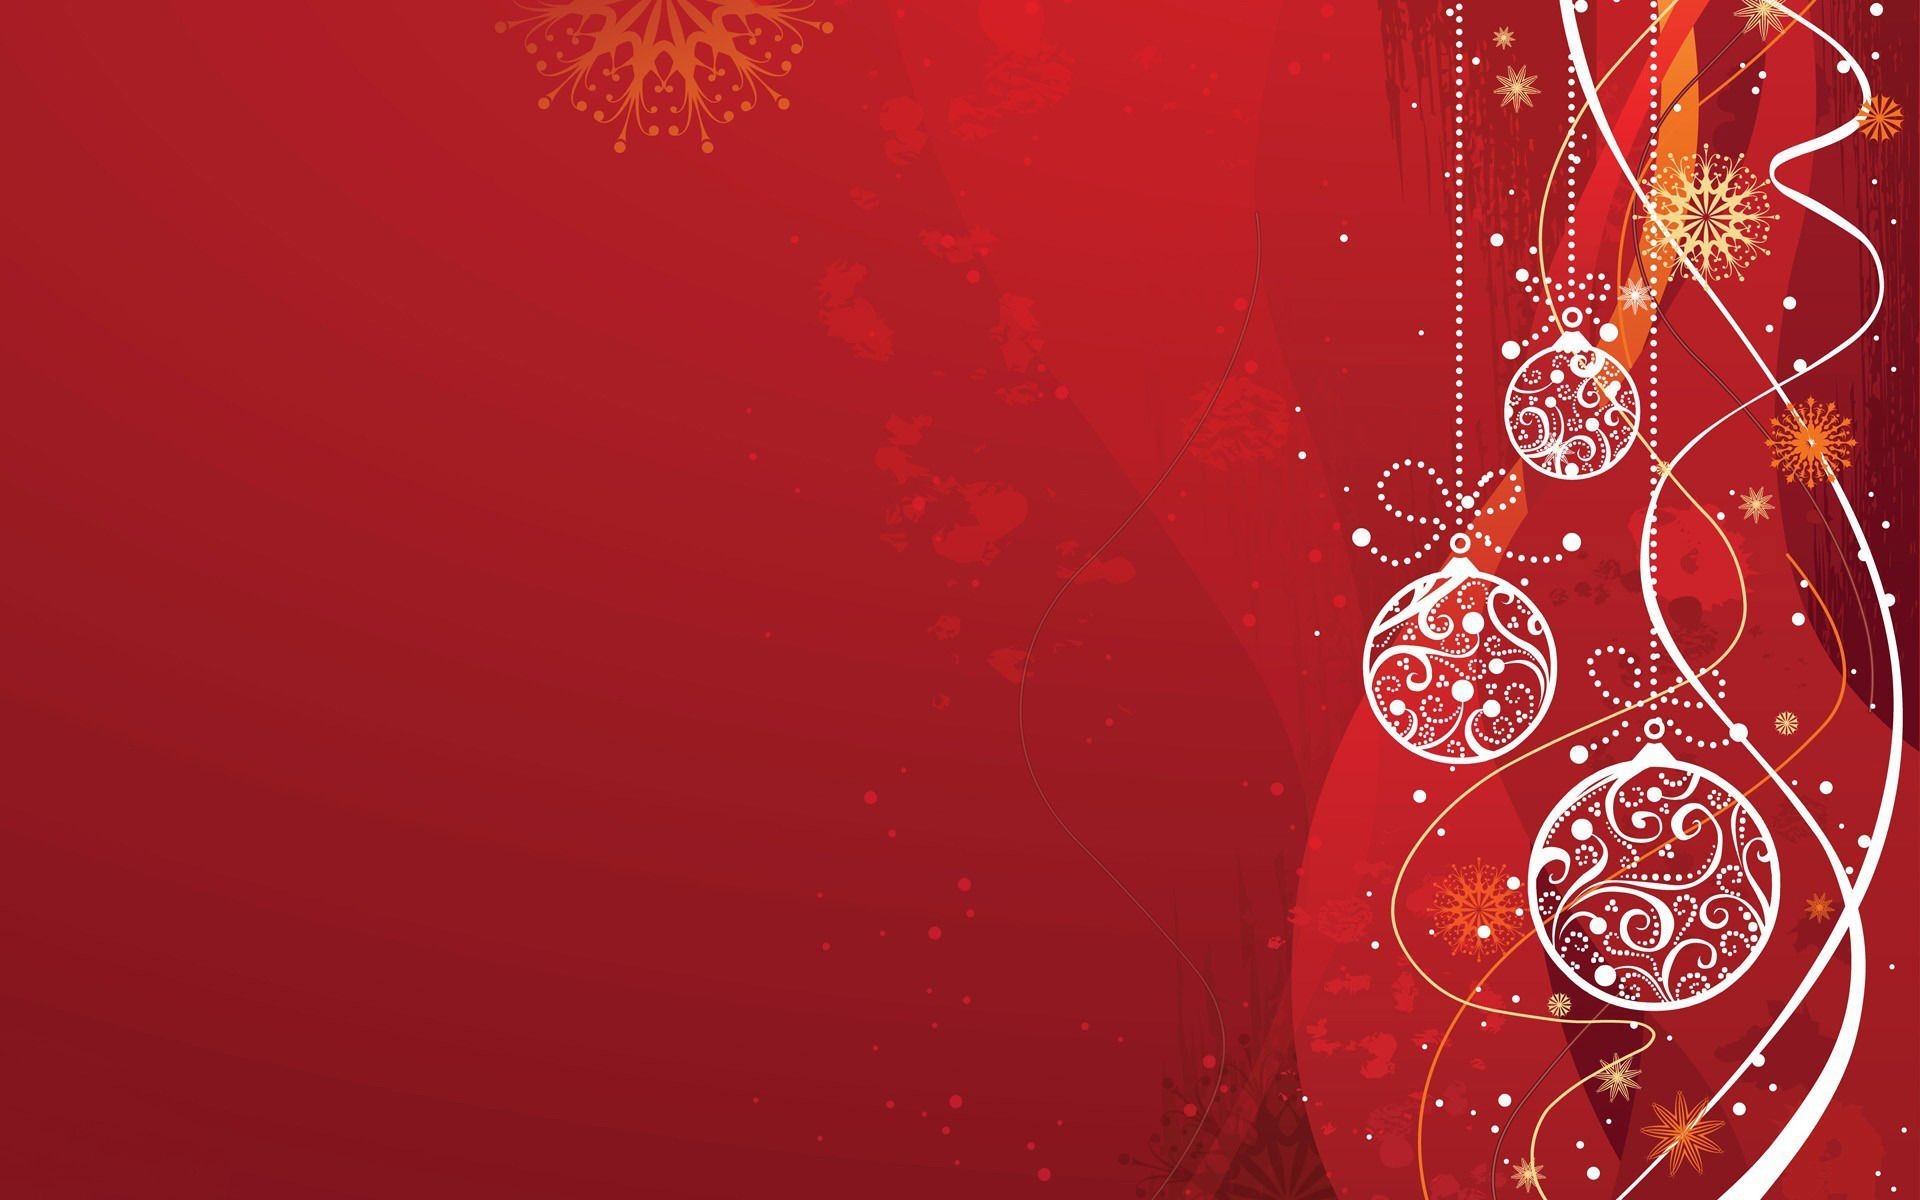 1920x1200 ... Christmas Party Backgrounds Christmas Ornament Wallpapers Hd Pixelstalk  Net Christmas Party Backgrounds 1195 Best ...